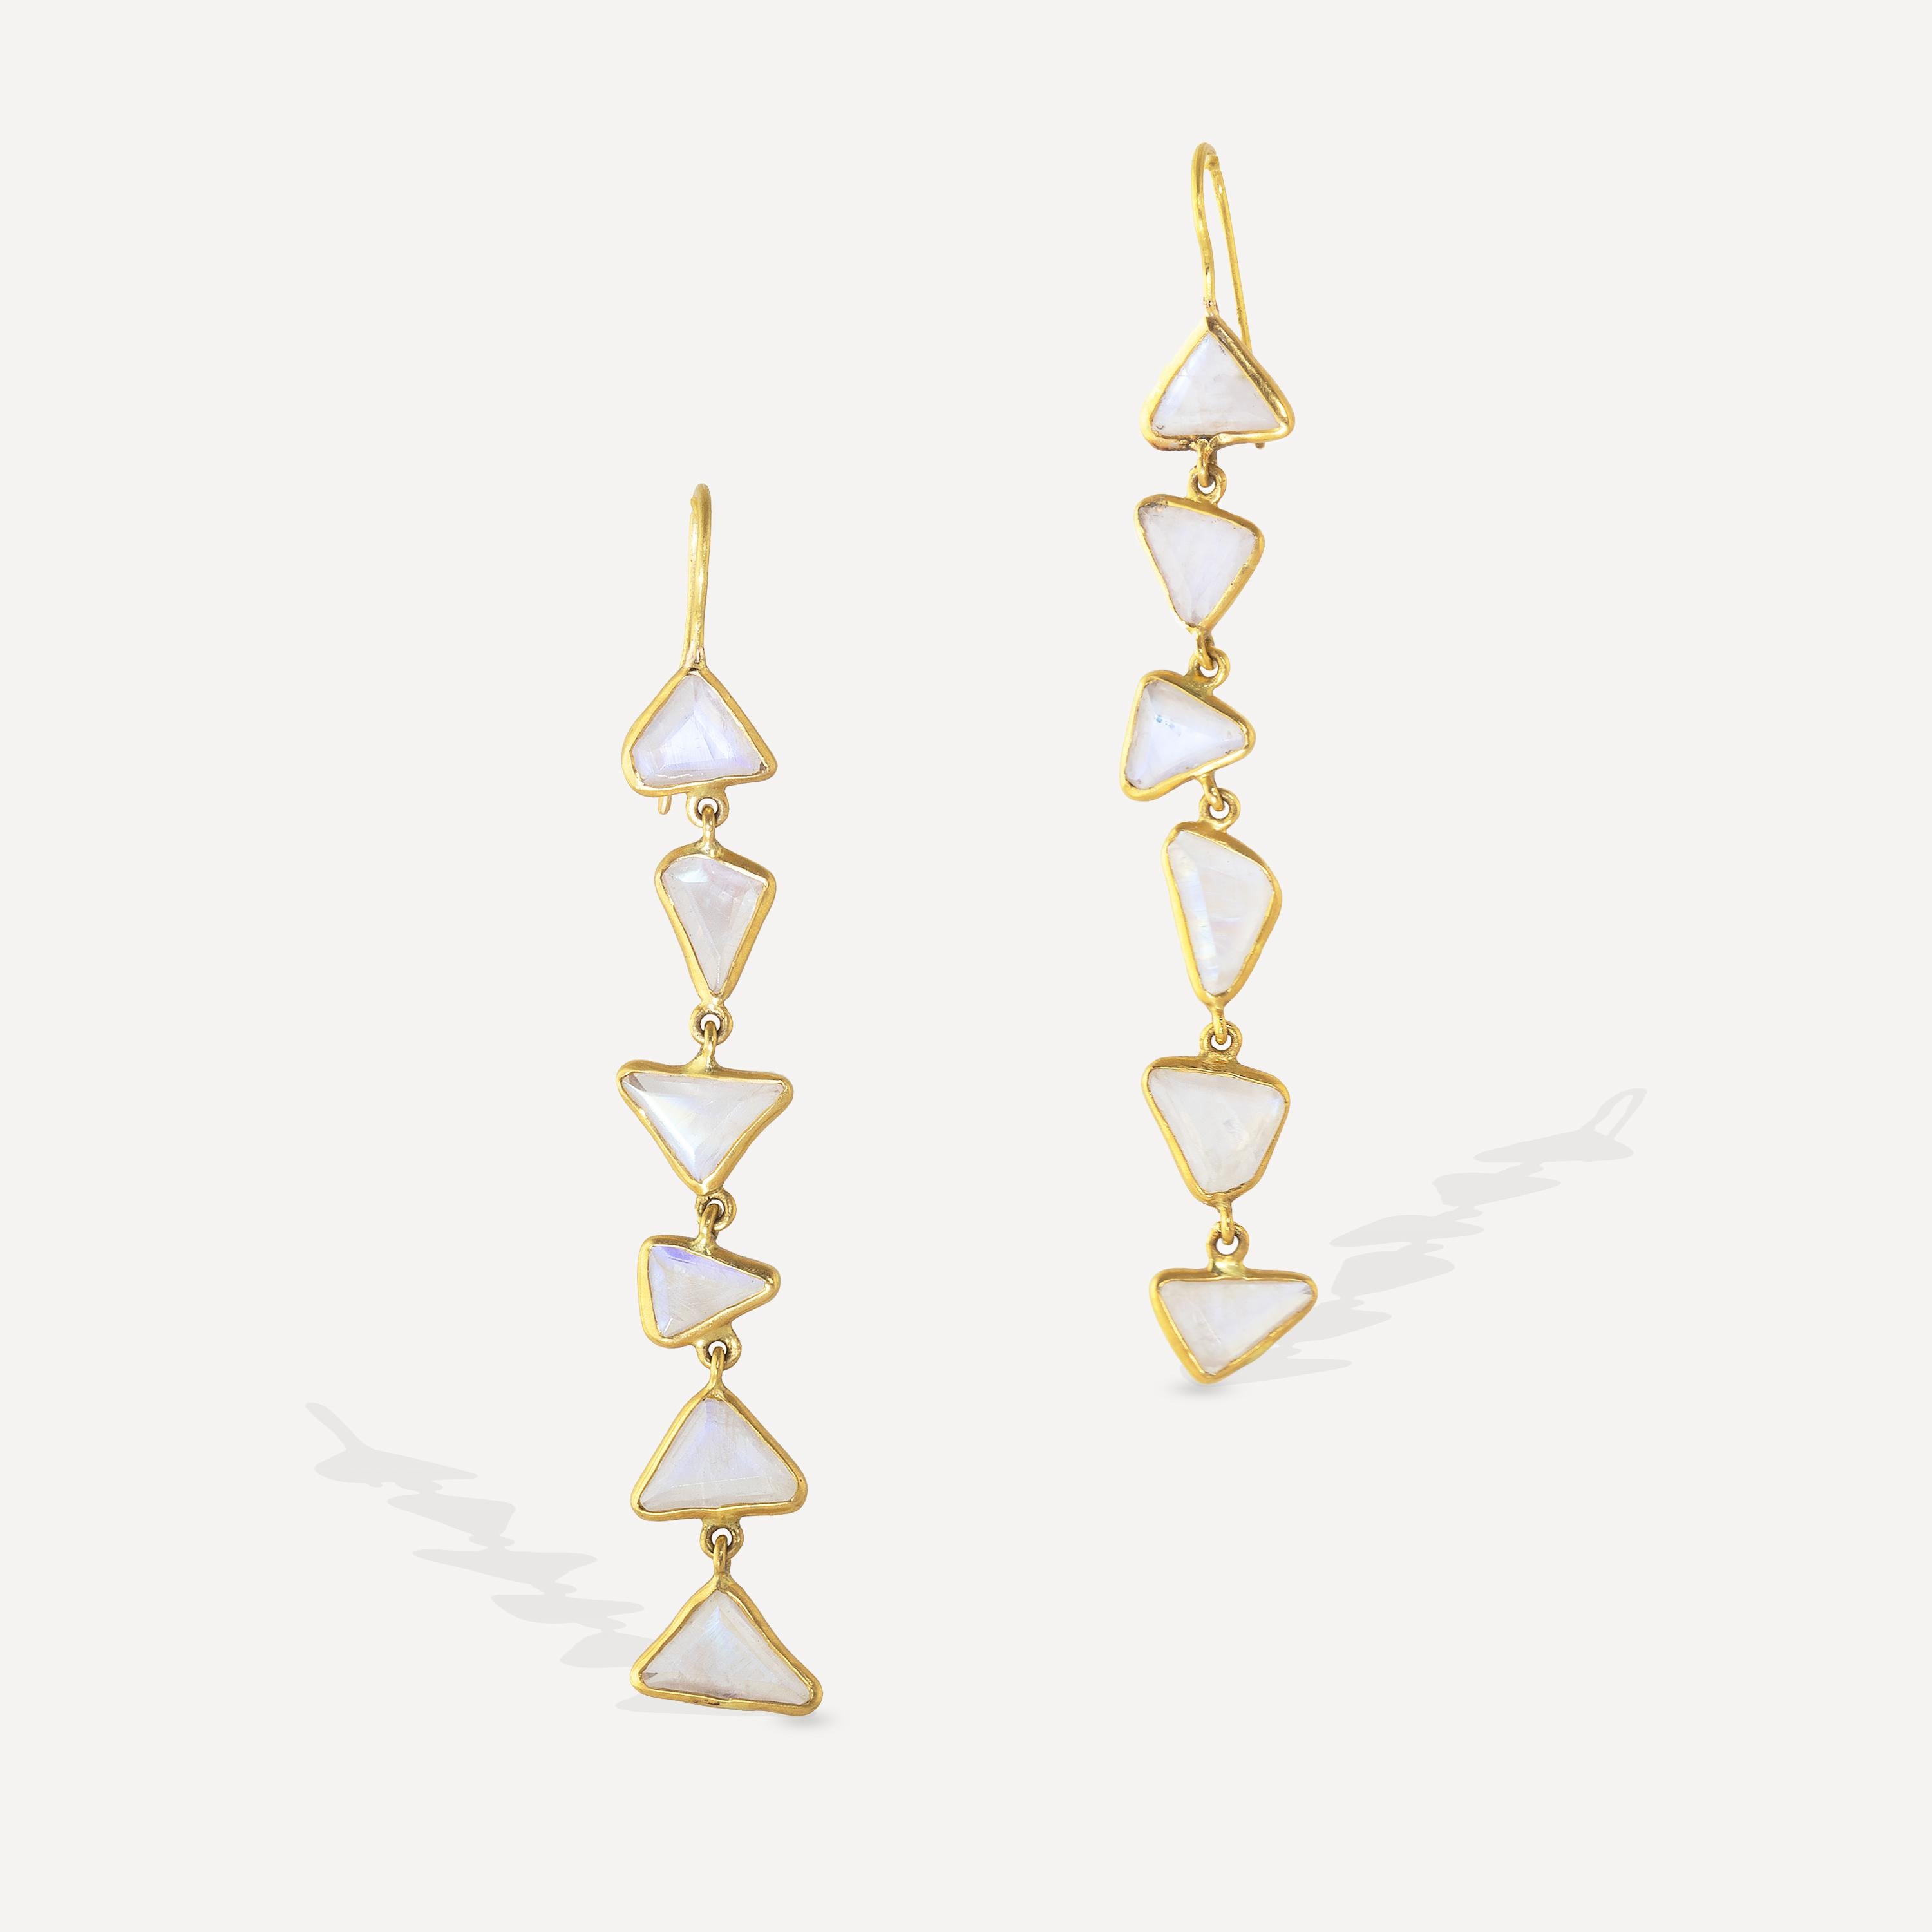 Rainbow Moonstone carved triangles are at the heart of these asymmetrical, one-of-a-kind earrings. Each triangle was carved by had with bezels. The design is based on the beauty of asymmetrical pieces which are all based on the individual